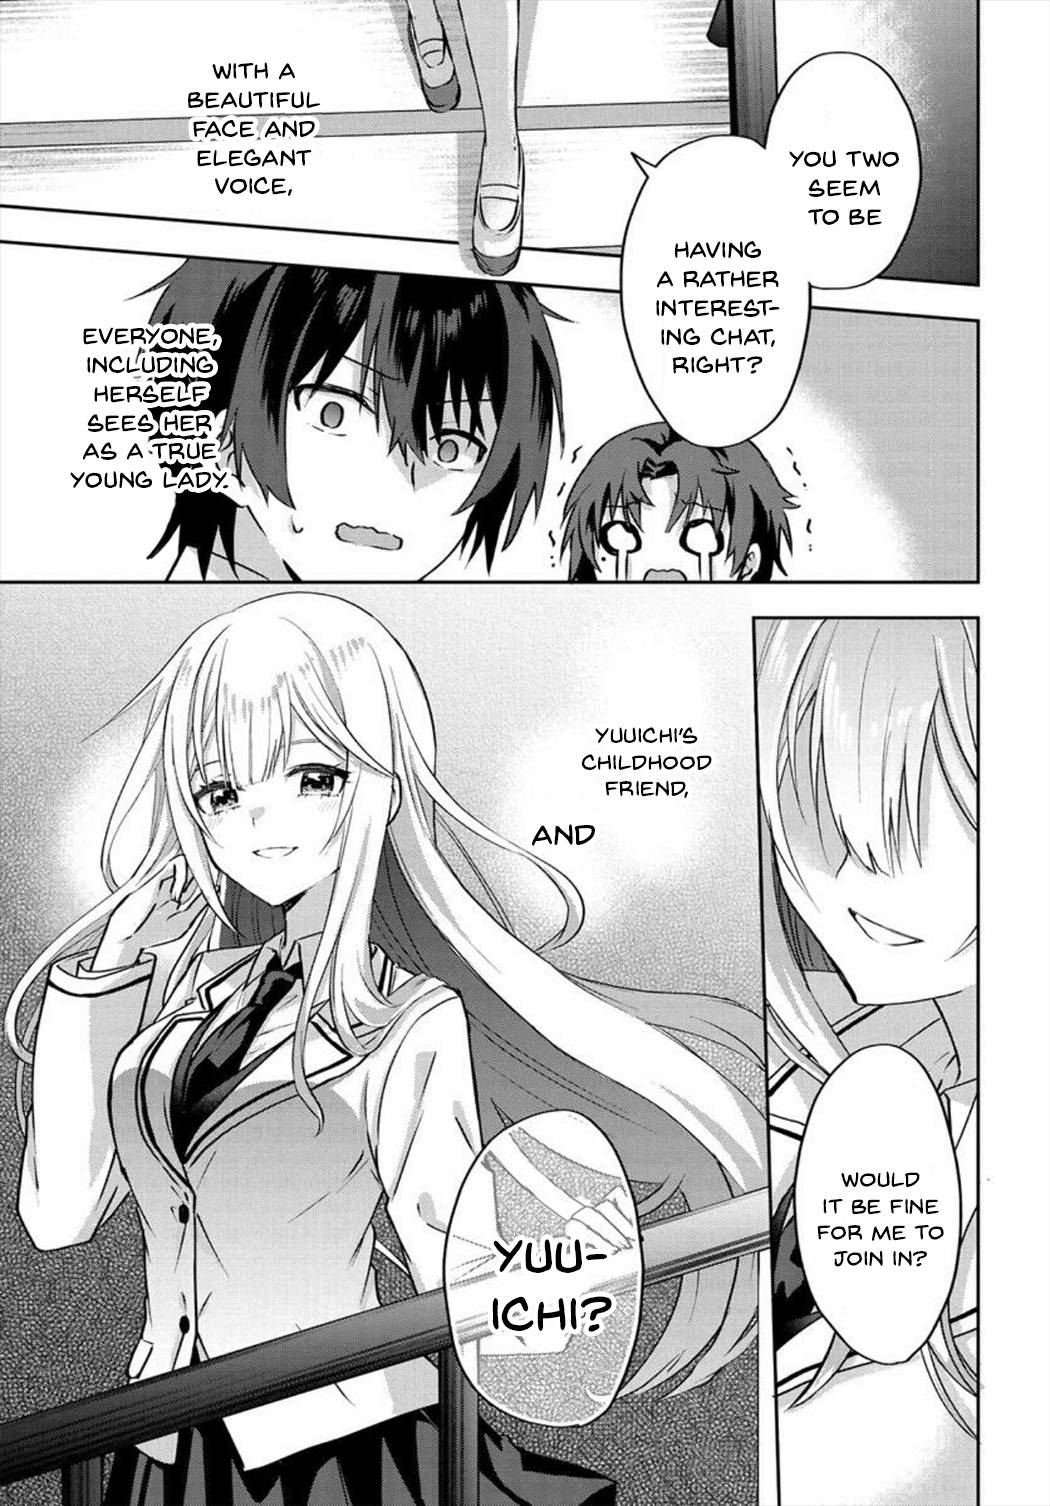 Since I’Ve Entered The World Of Romantic Comedy Manga, I’Ll Do My Best To Make The Losing Heroine Happy - chapter 3.1 - #5